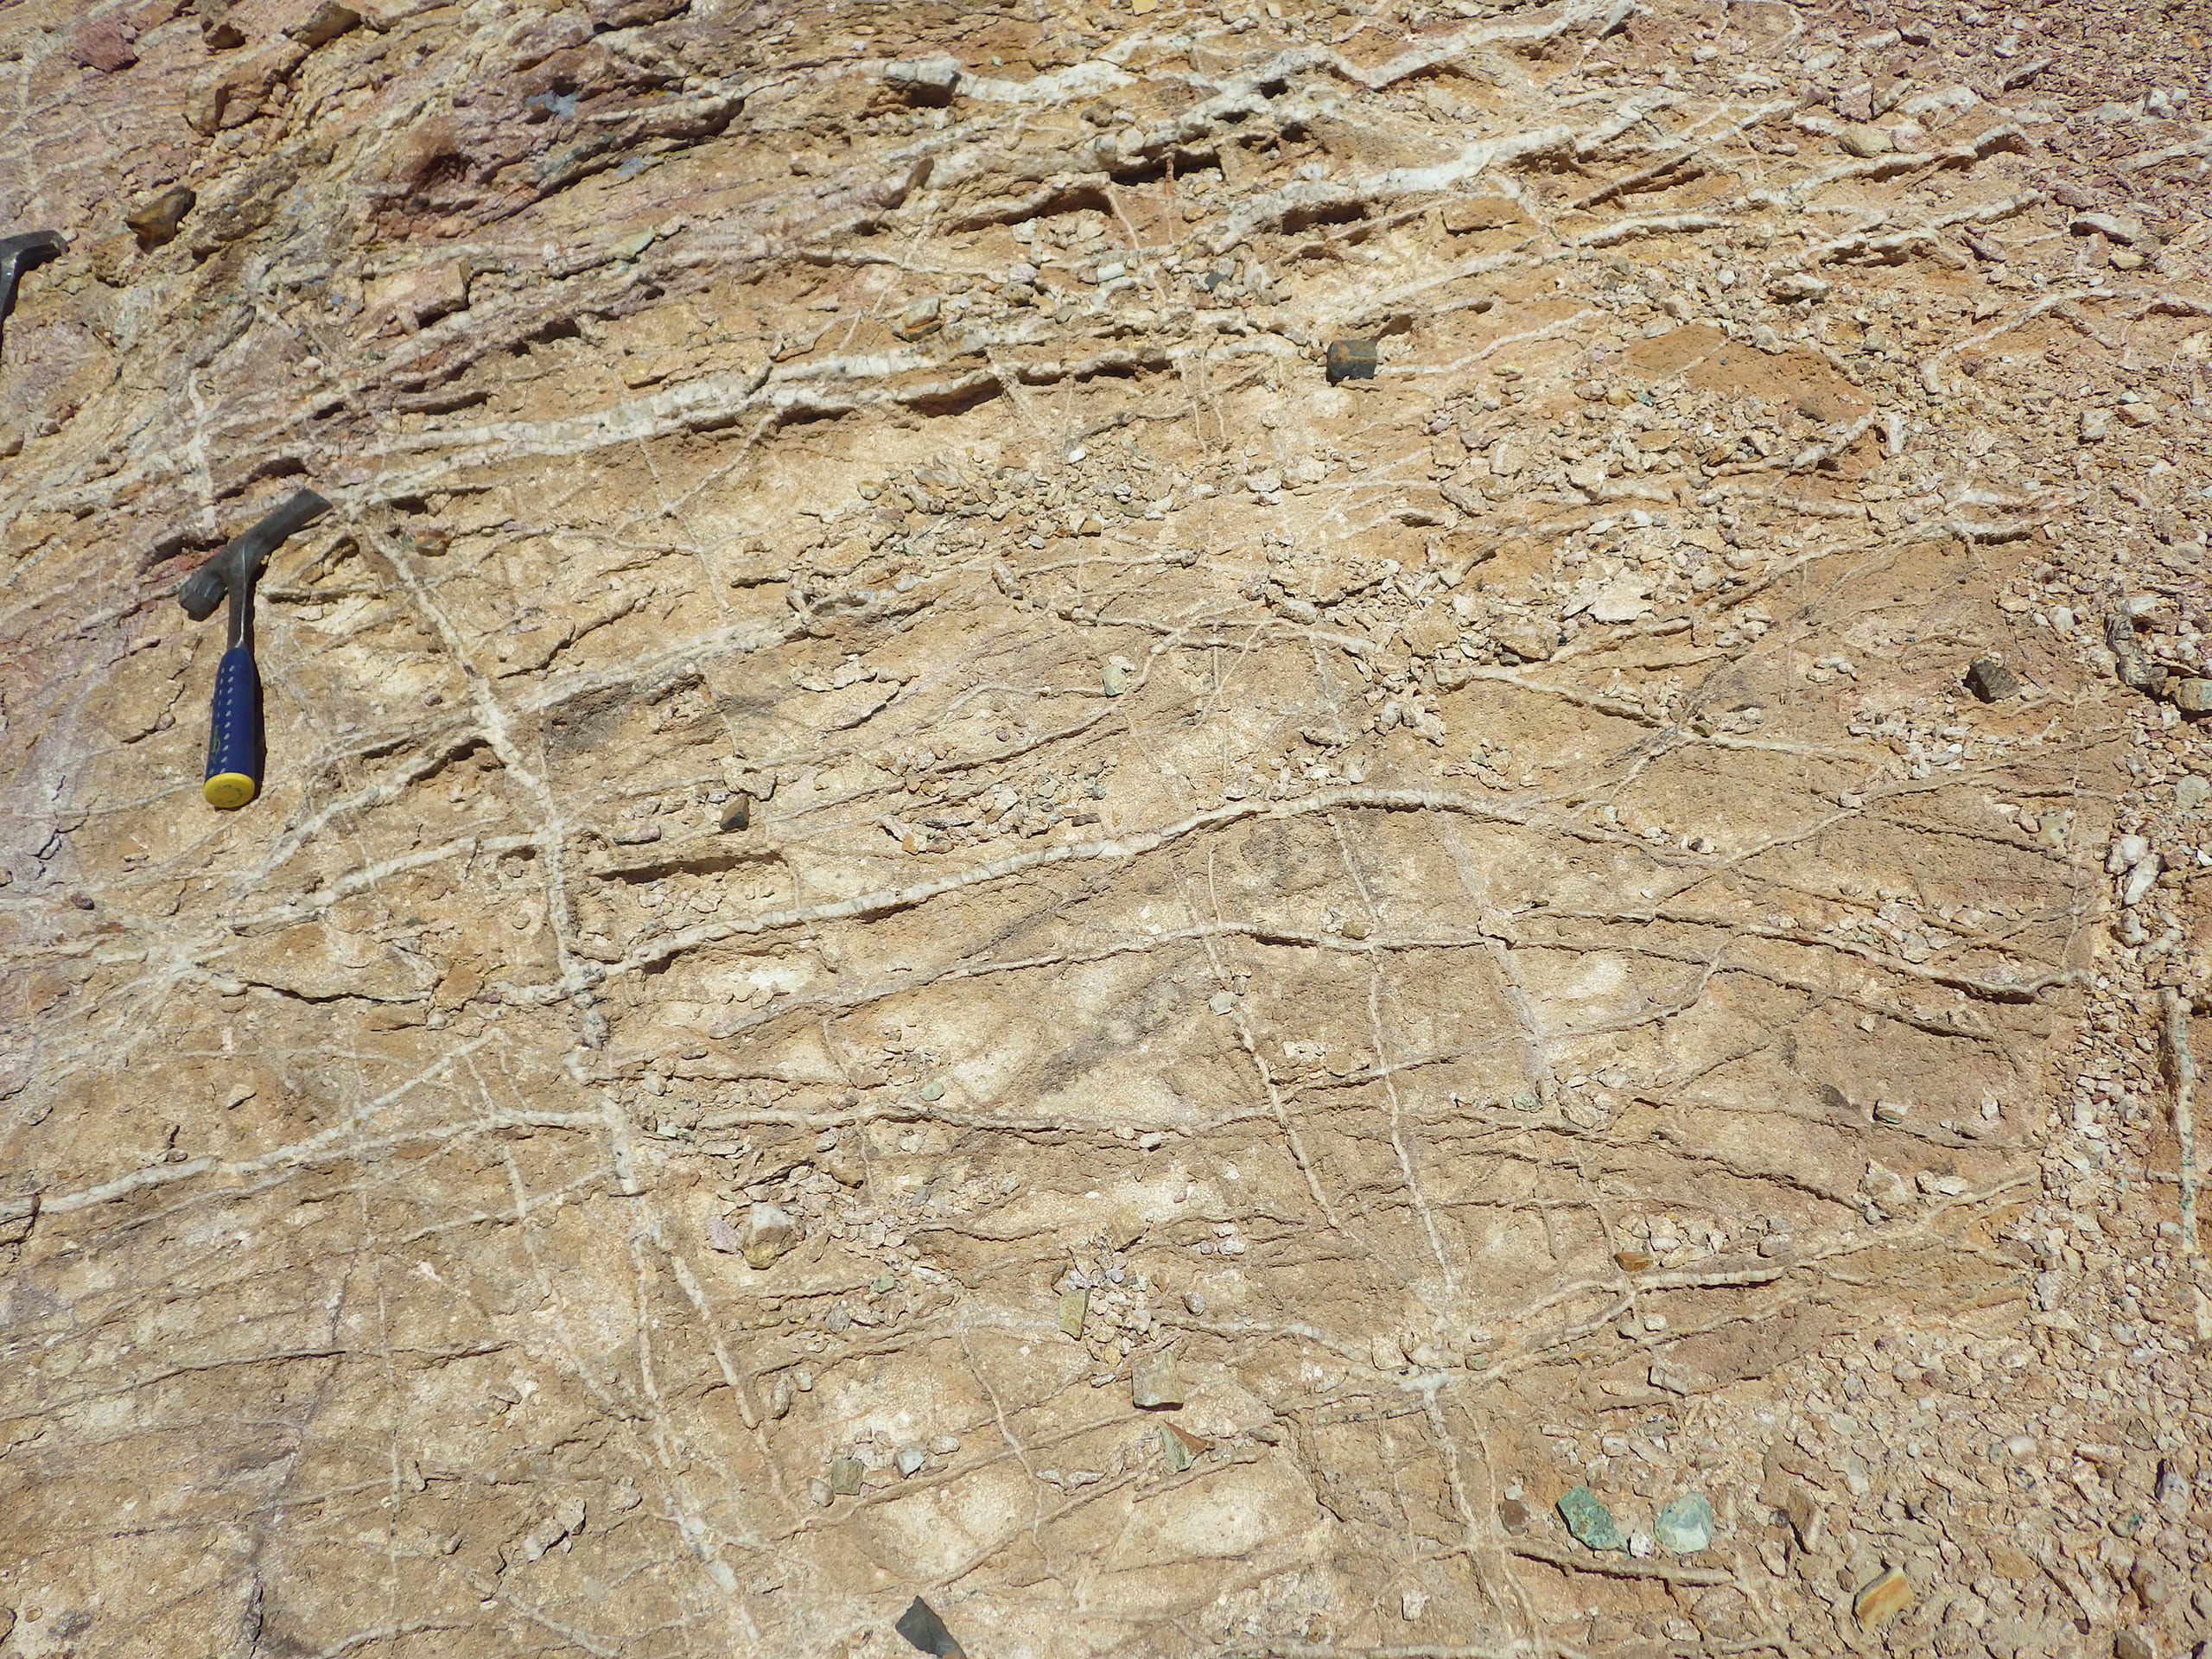 Stockwork veins of quartz with copper oxide after copper sulfide in monzonite porphyry plug, East Zone